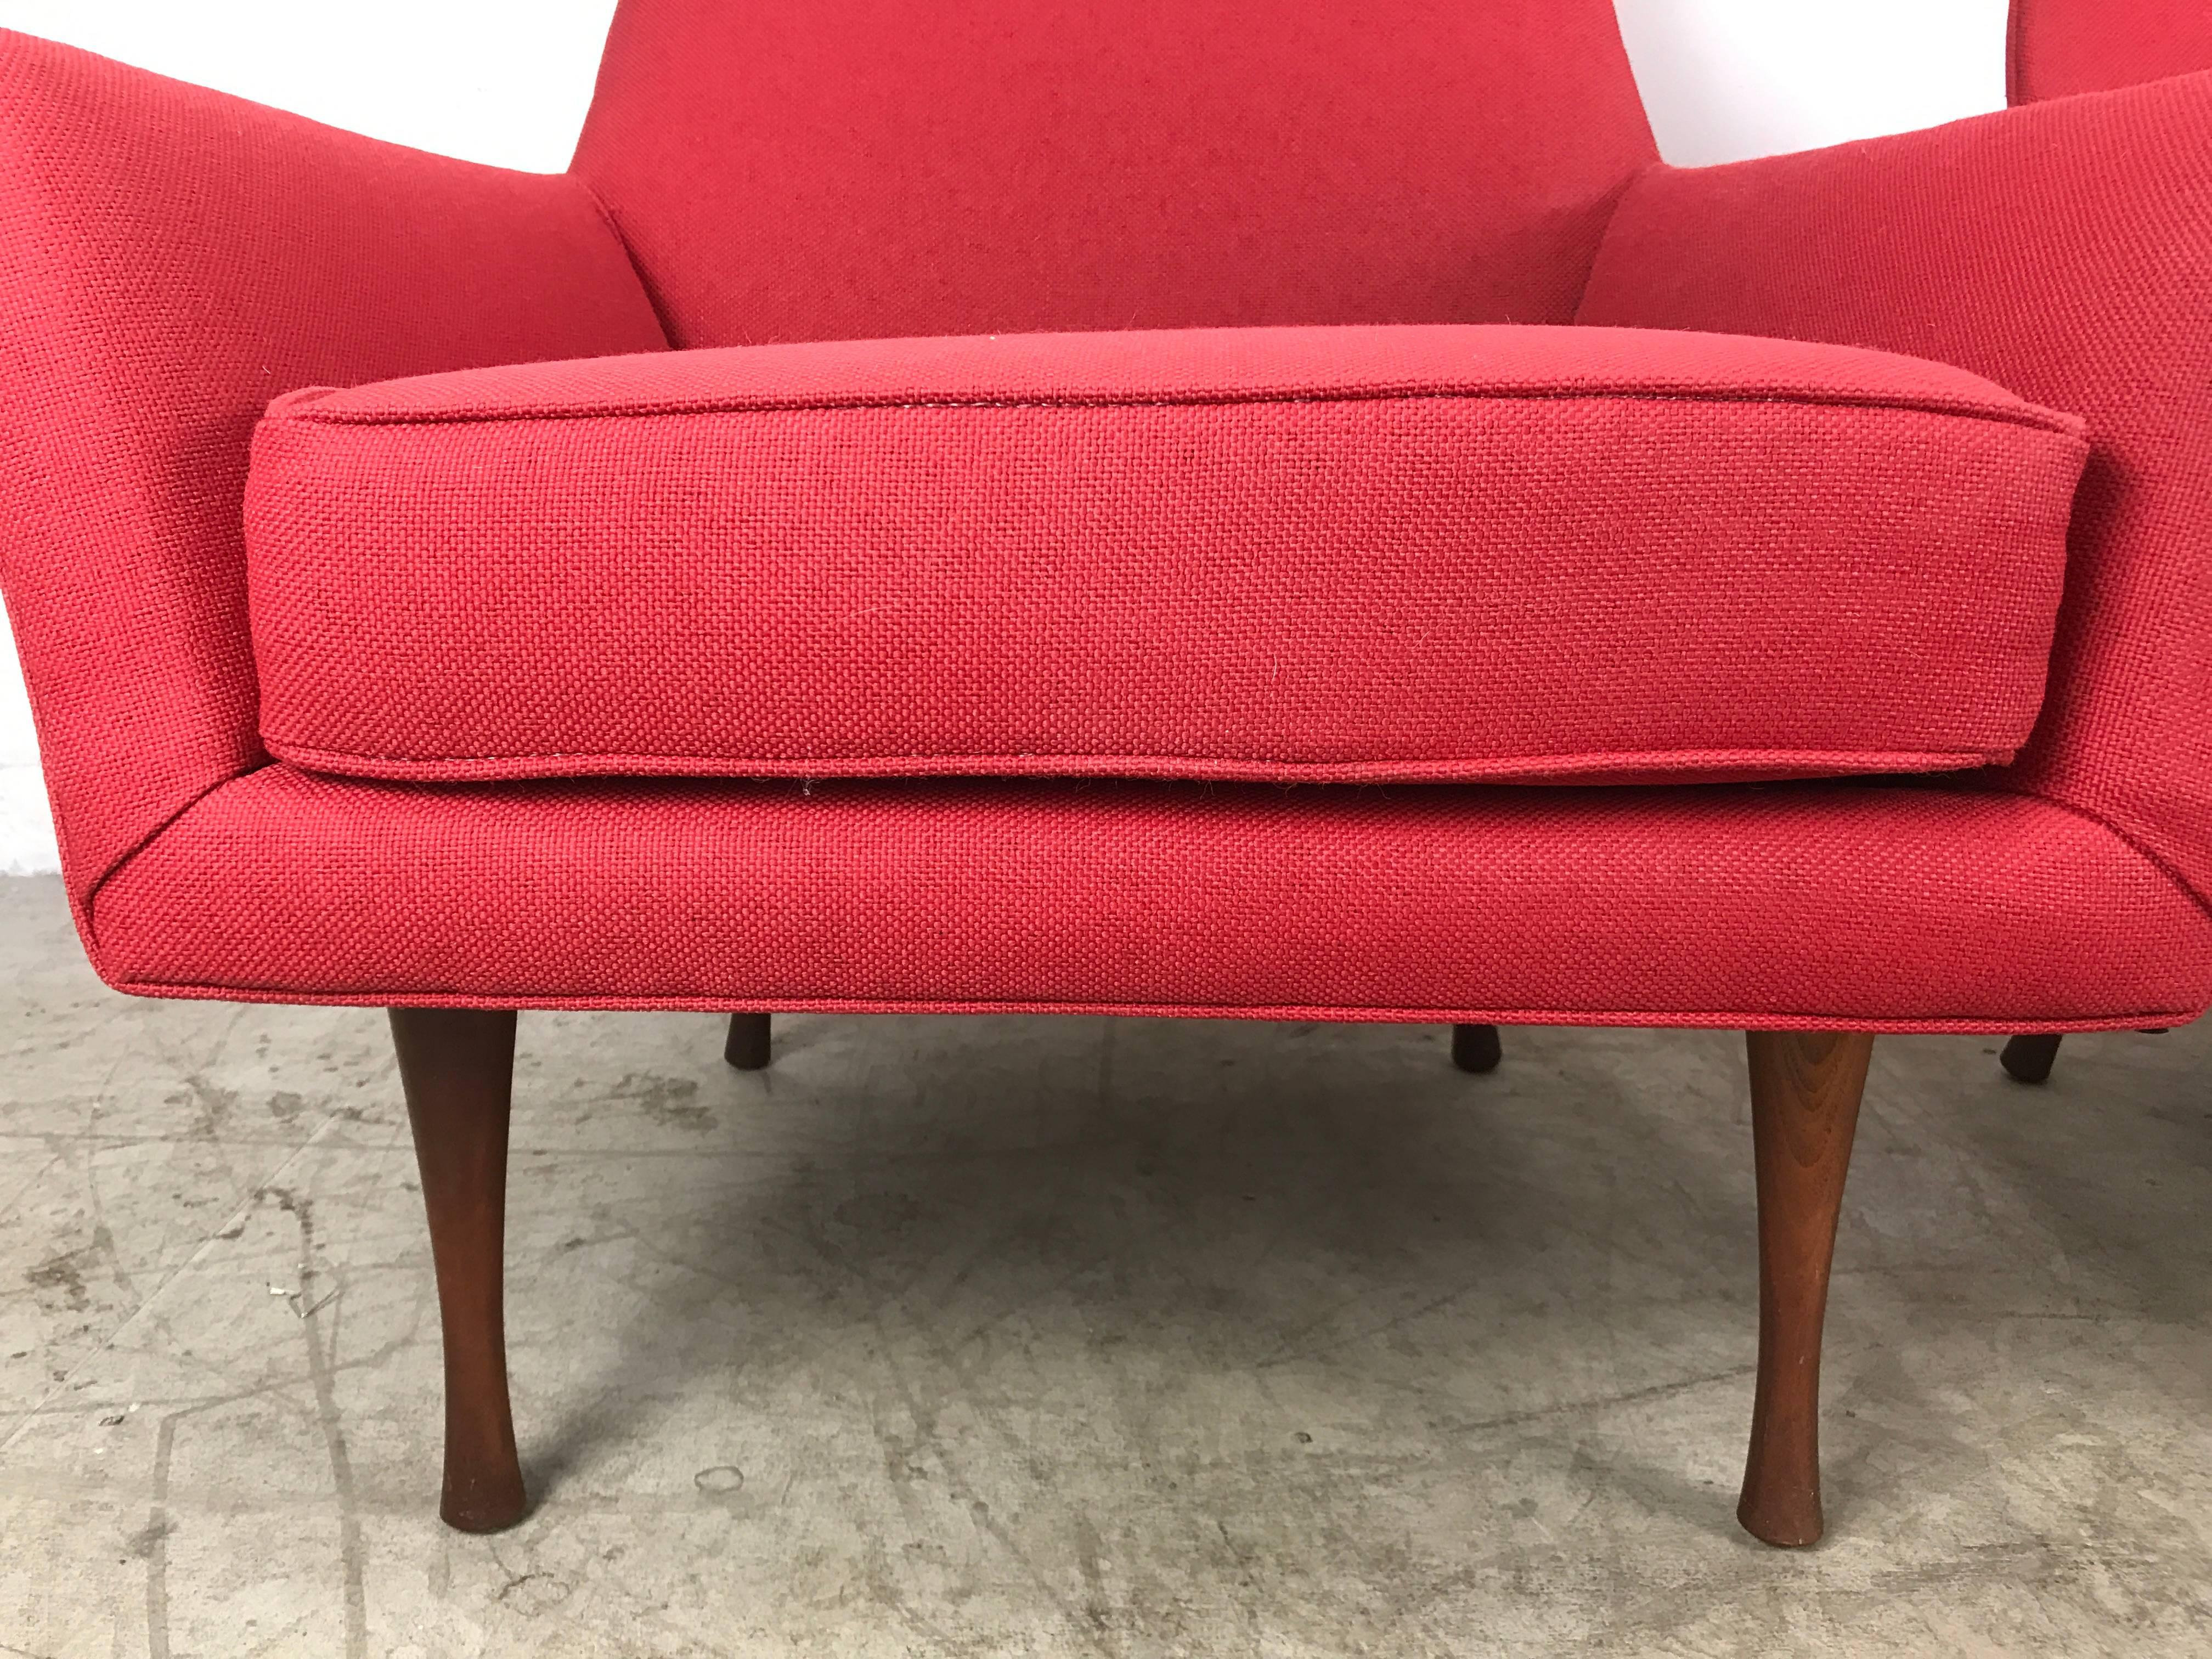 Classic Mid-Century Modern lounge chairs designed by Paul McCobb manufactured by Widdicomb from the Symmetric Group. Recently reupholstered in red Knoll wool fabric. Stunning! Extremely comfortable. Amazing design. Hand delivery available to New